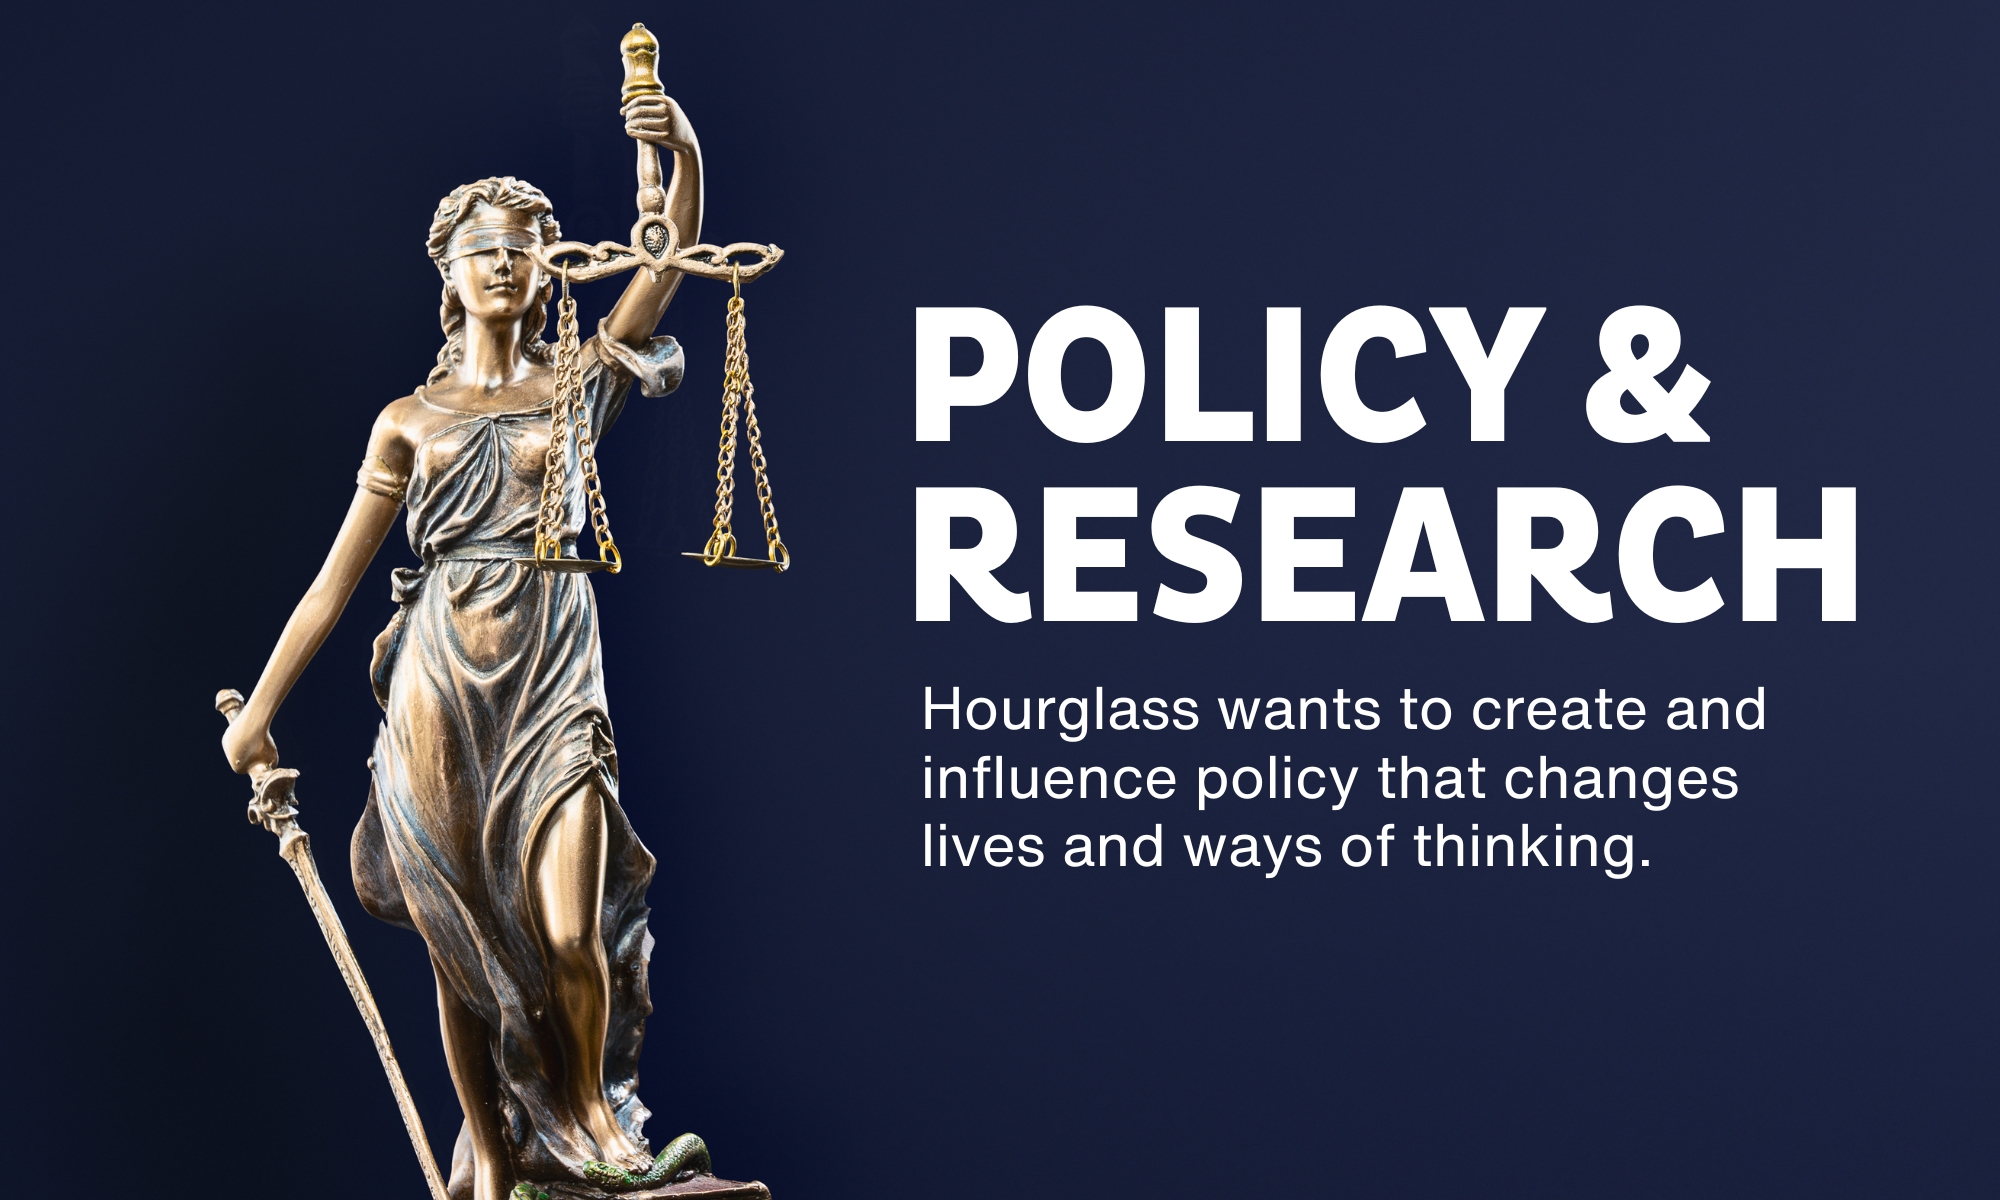 policyandresearch